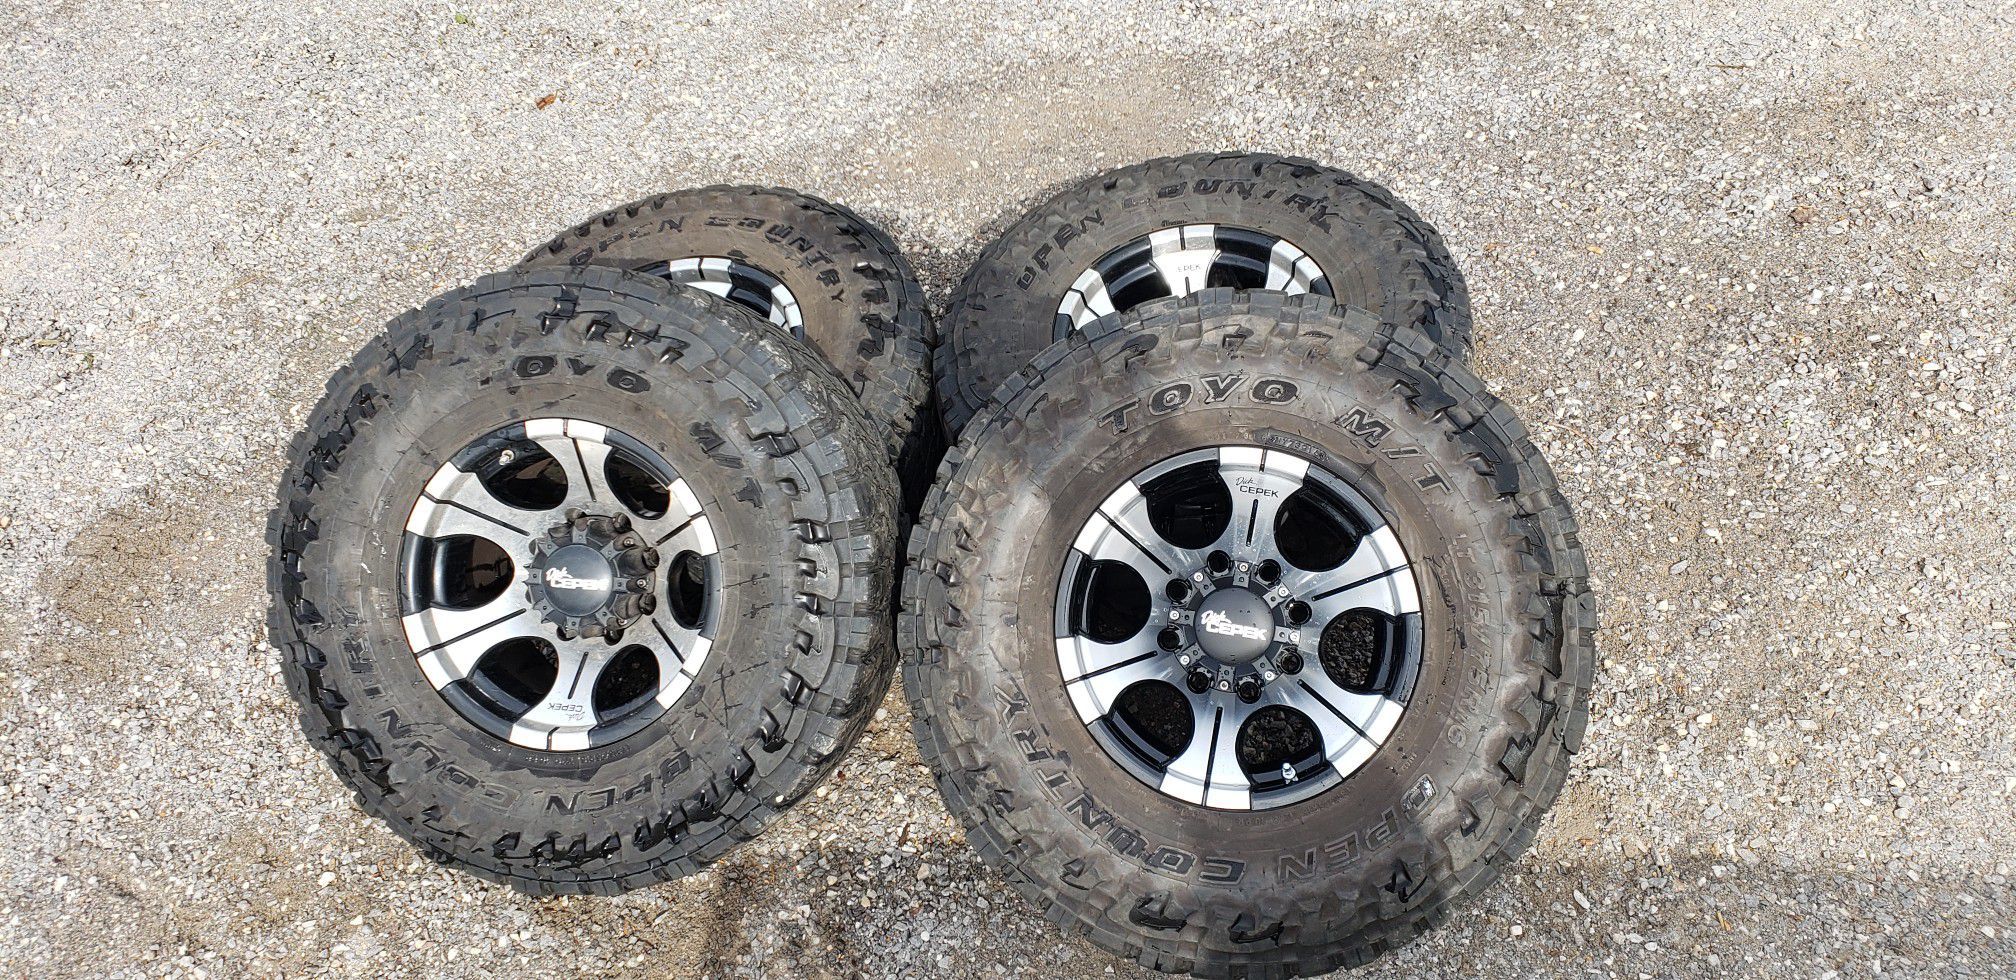 Toyo LT 315/75/16 35x12.50x16 Open Country Tires with Dick Cepek Wheels 8x170 Pattern